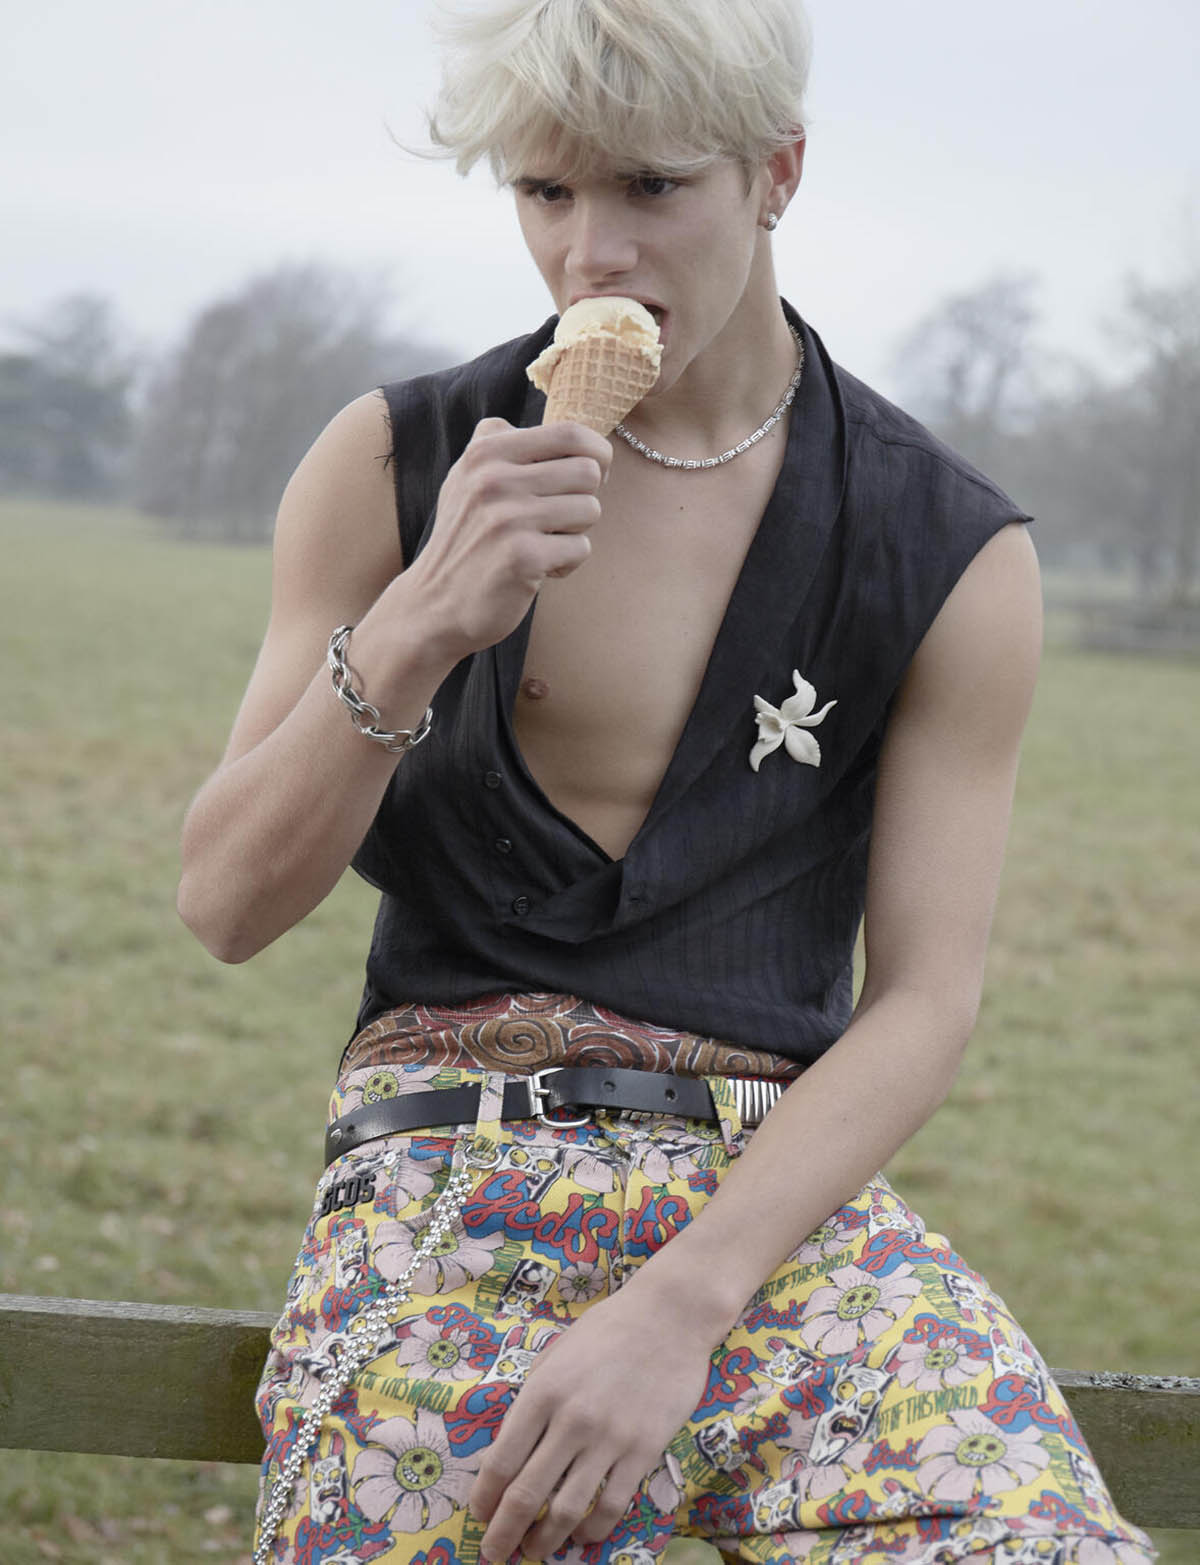 Romeo Beckham covers L’Uomo Vogue Issue 10 by Mert & Marcus